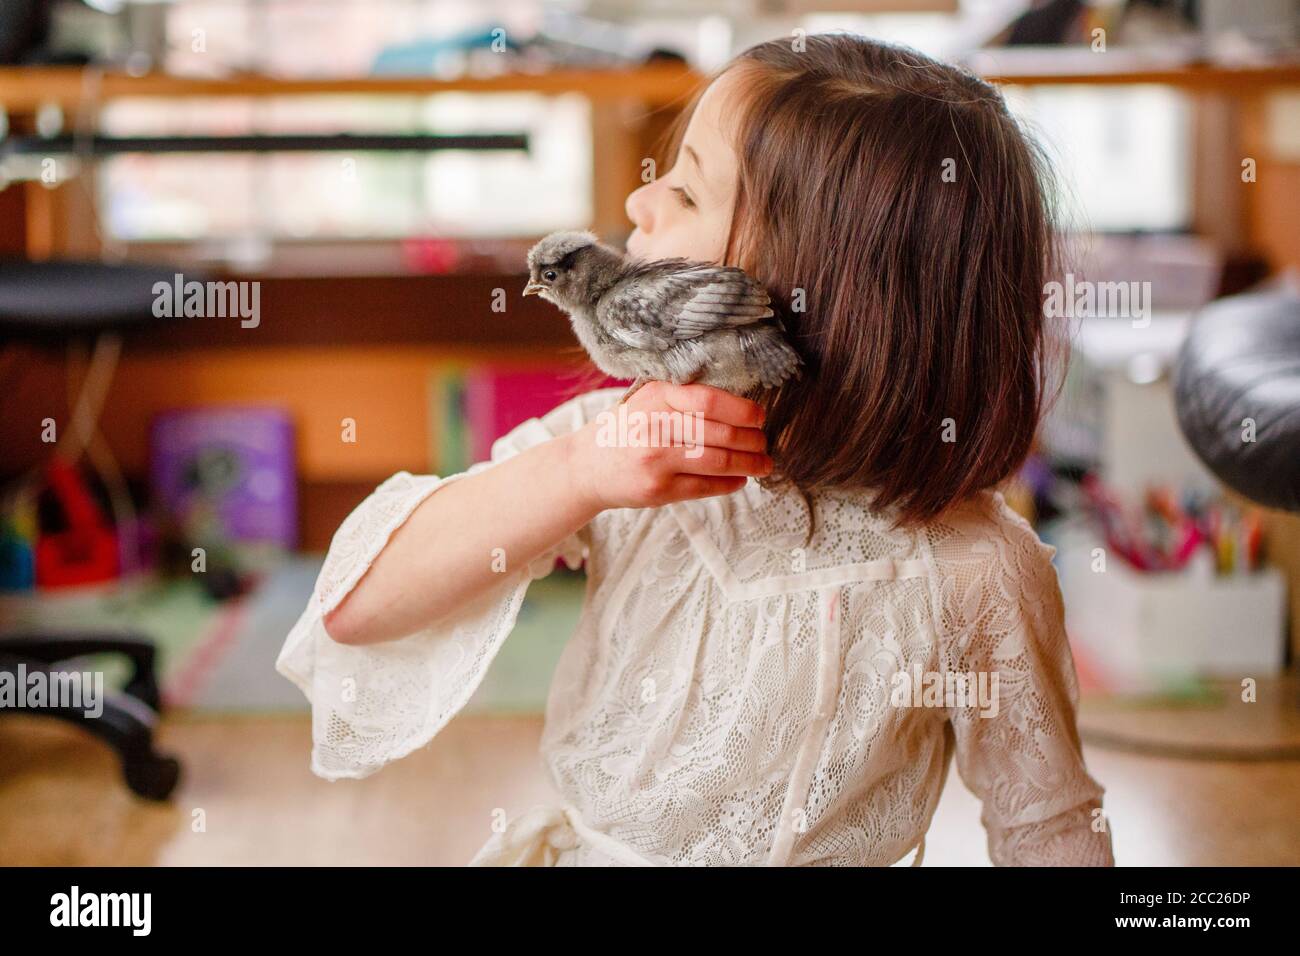 A beautiful little girl in lace dress holds baby chick up to her cheek Stock Photo